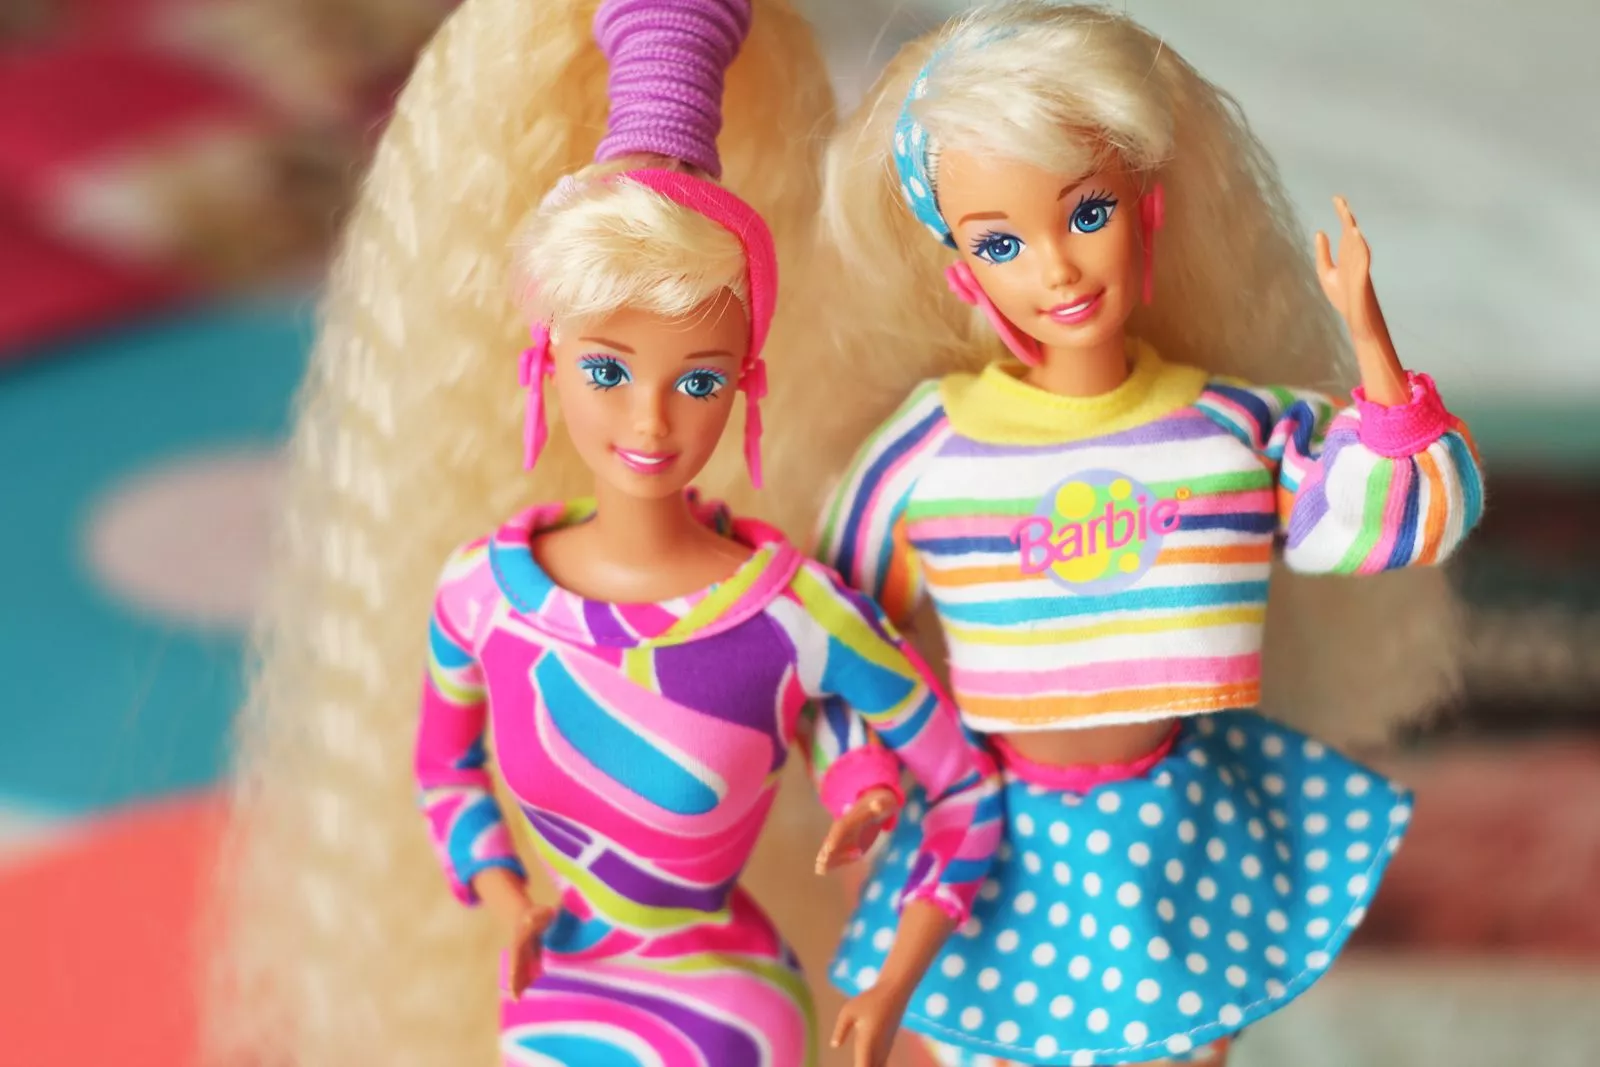 Two Barbie dolls stand side-by-side